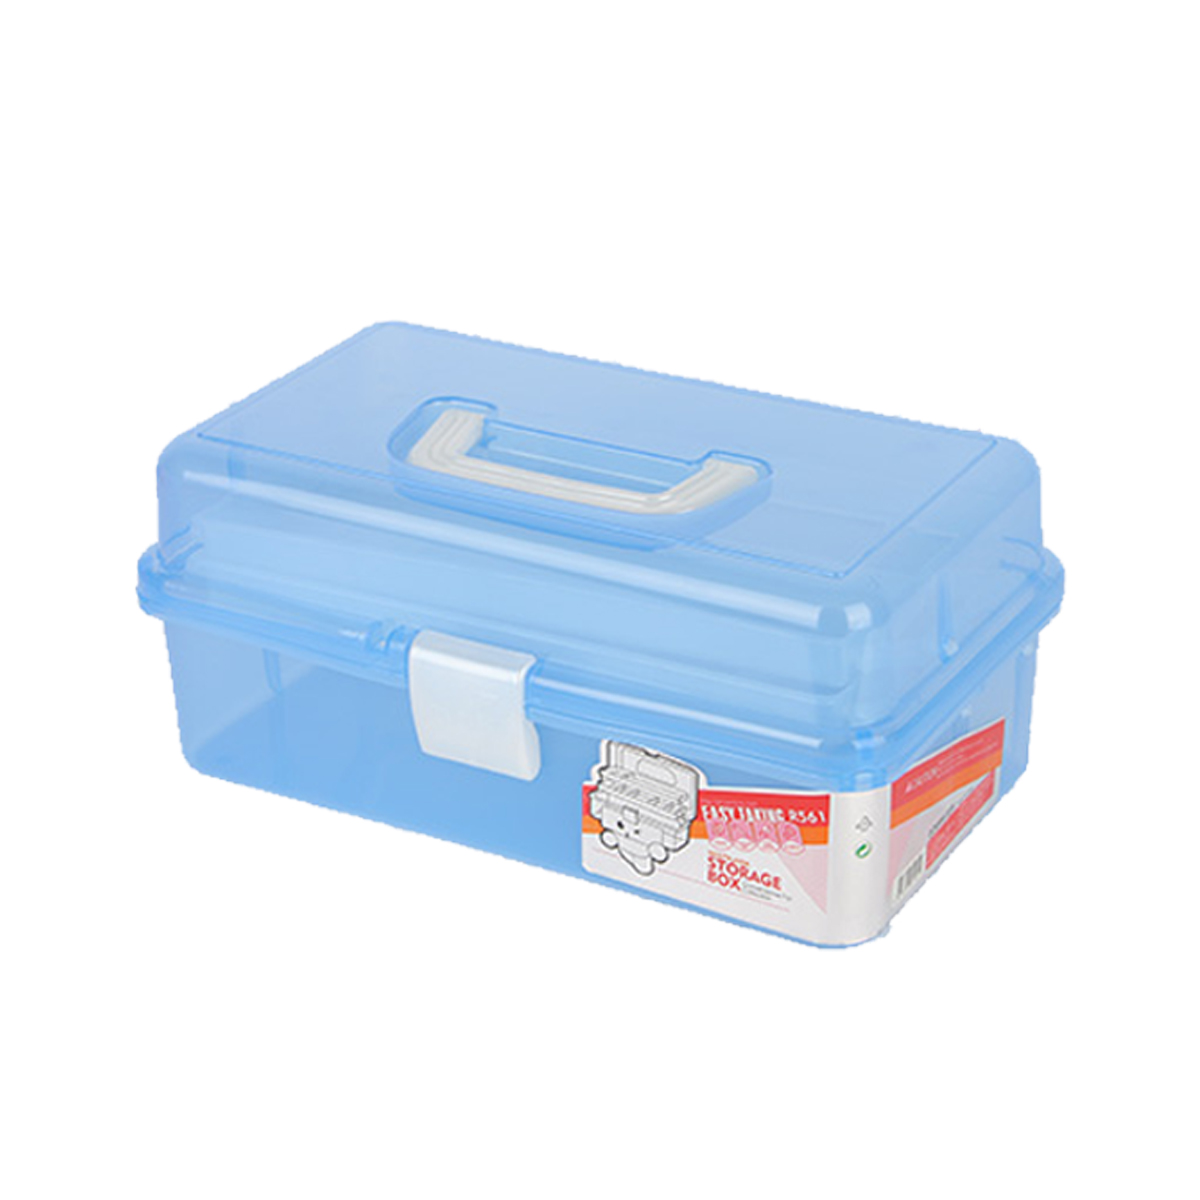 Clear-Plastic-Craft-Makeup-Organizer-Jewelry-Storage-Compartment-Tools-Box-Case-1263882-3